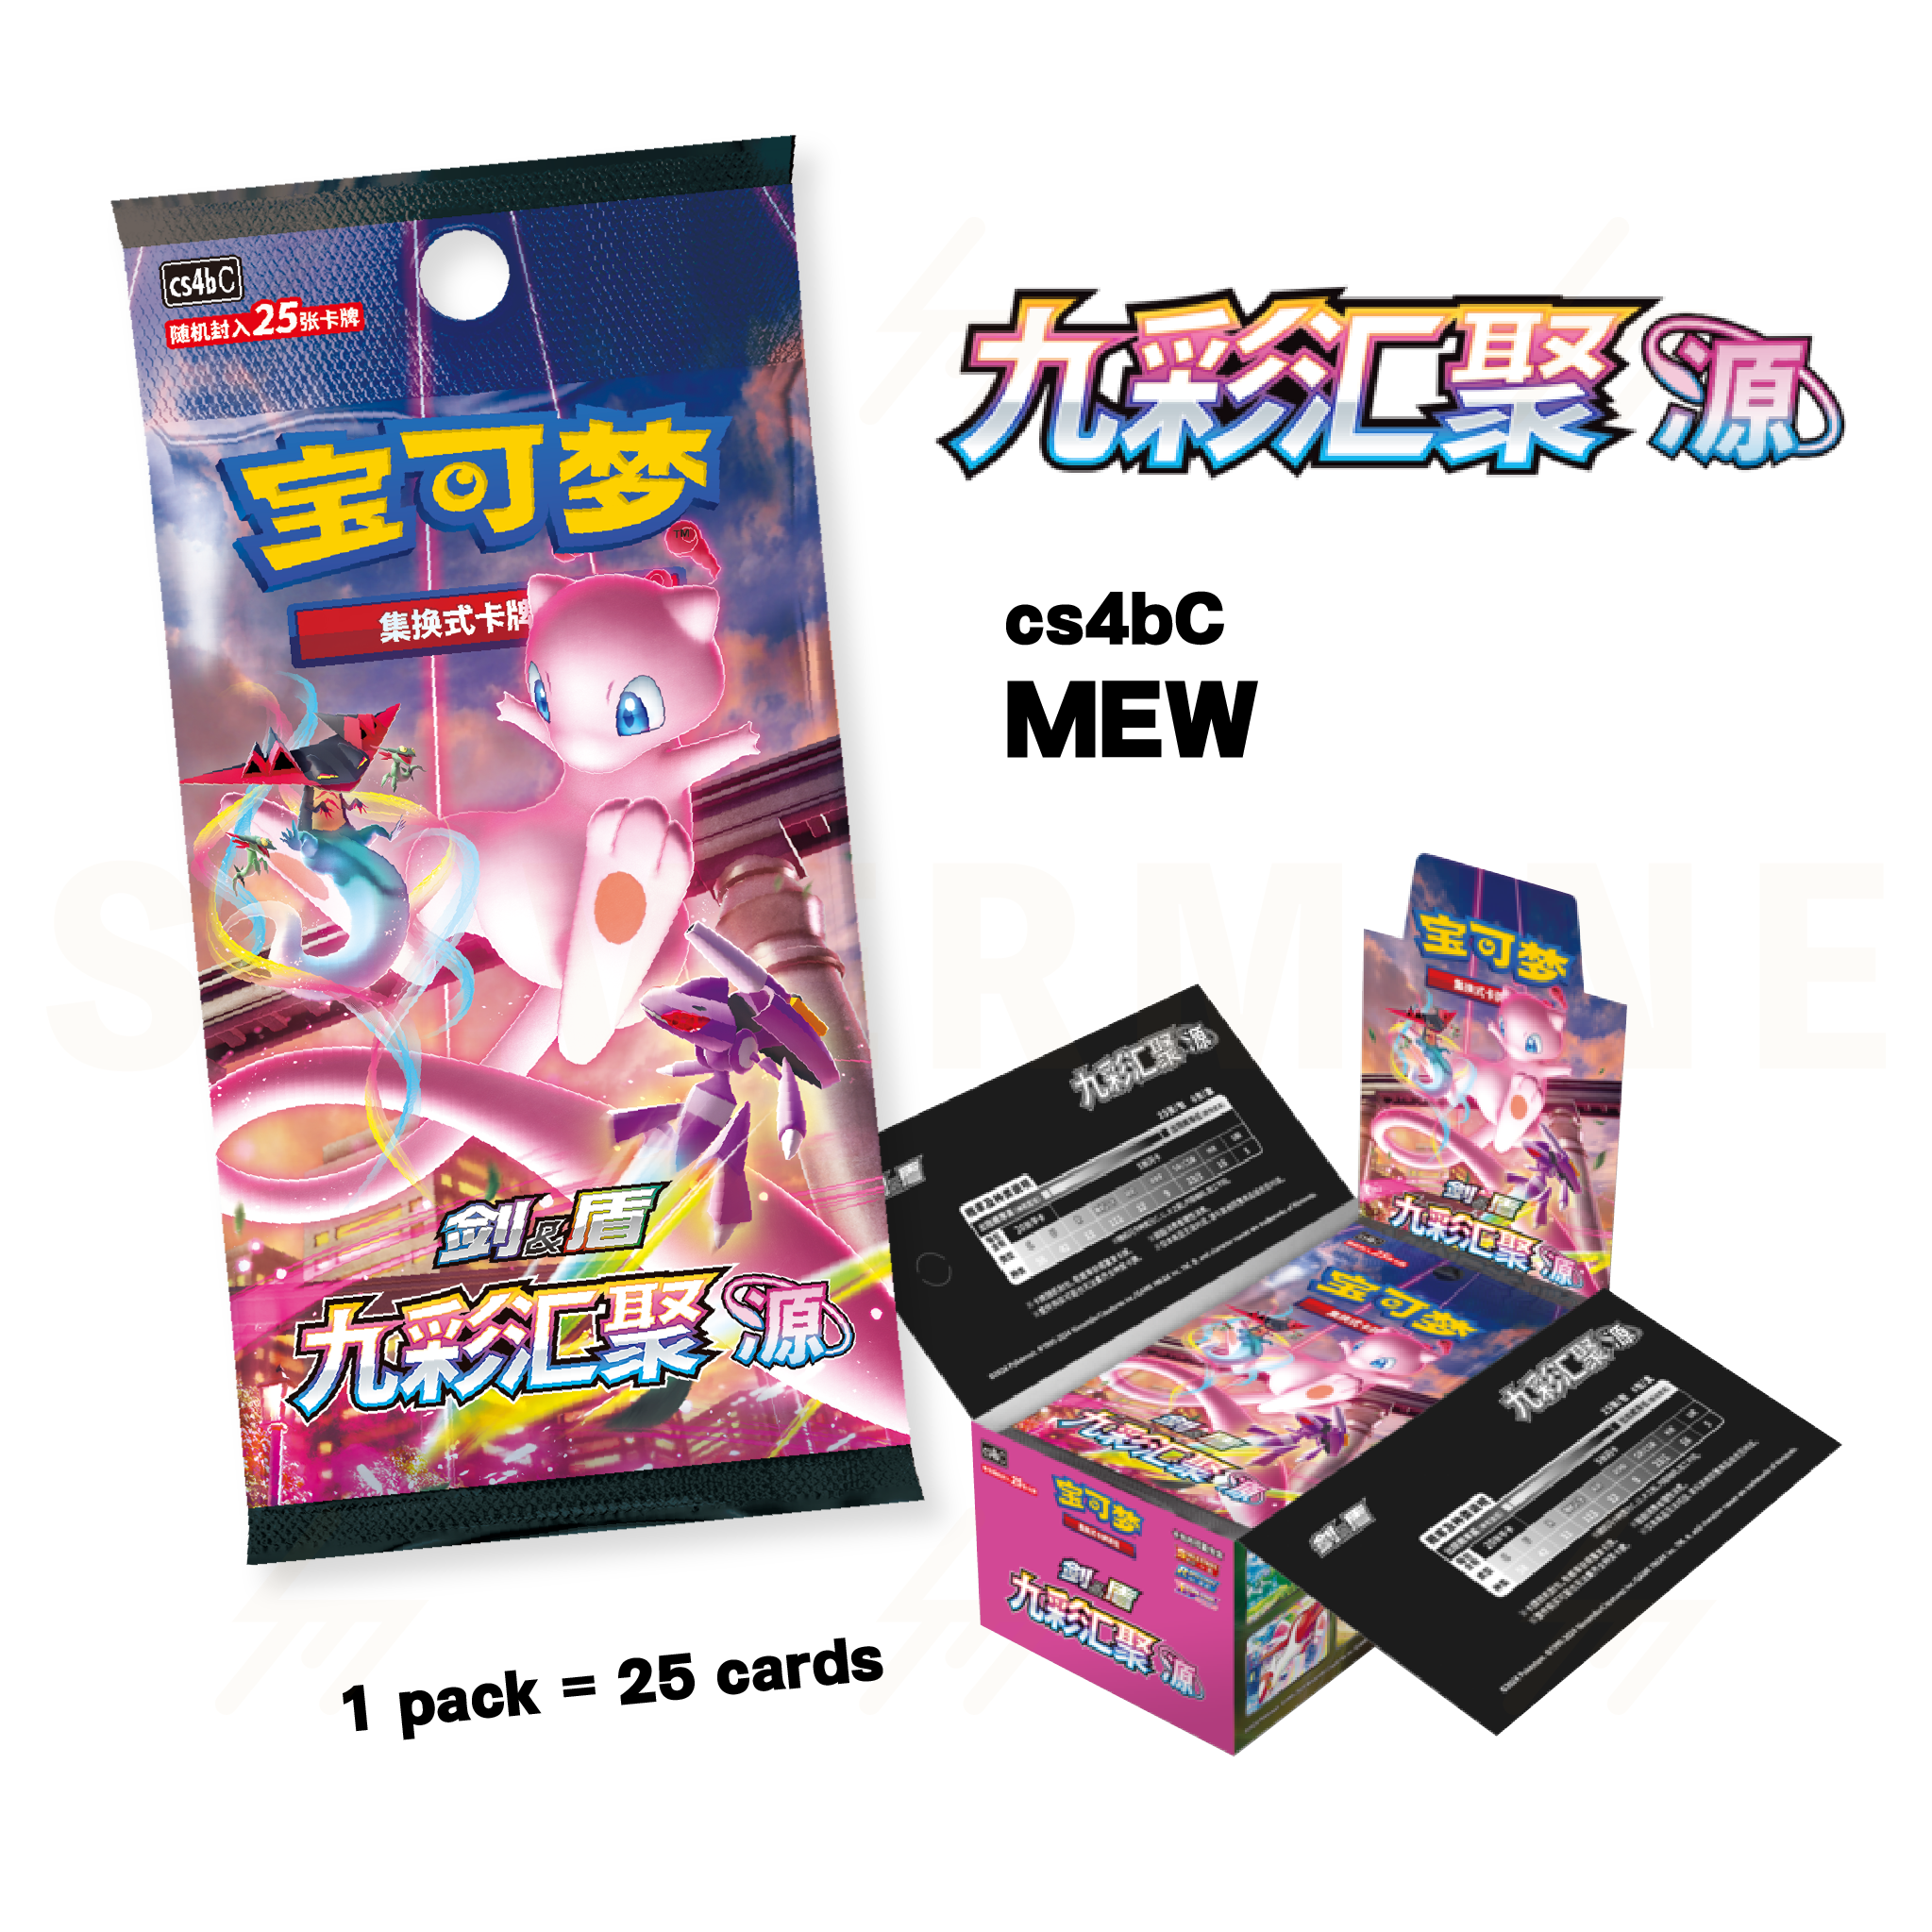 cs4aC & cs4bC (Fat Pack Ver.) - Pokemon TCG - Booster Box - Sword & Shield - Nine Colors Gathering (Simplified Chinese)